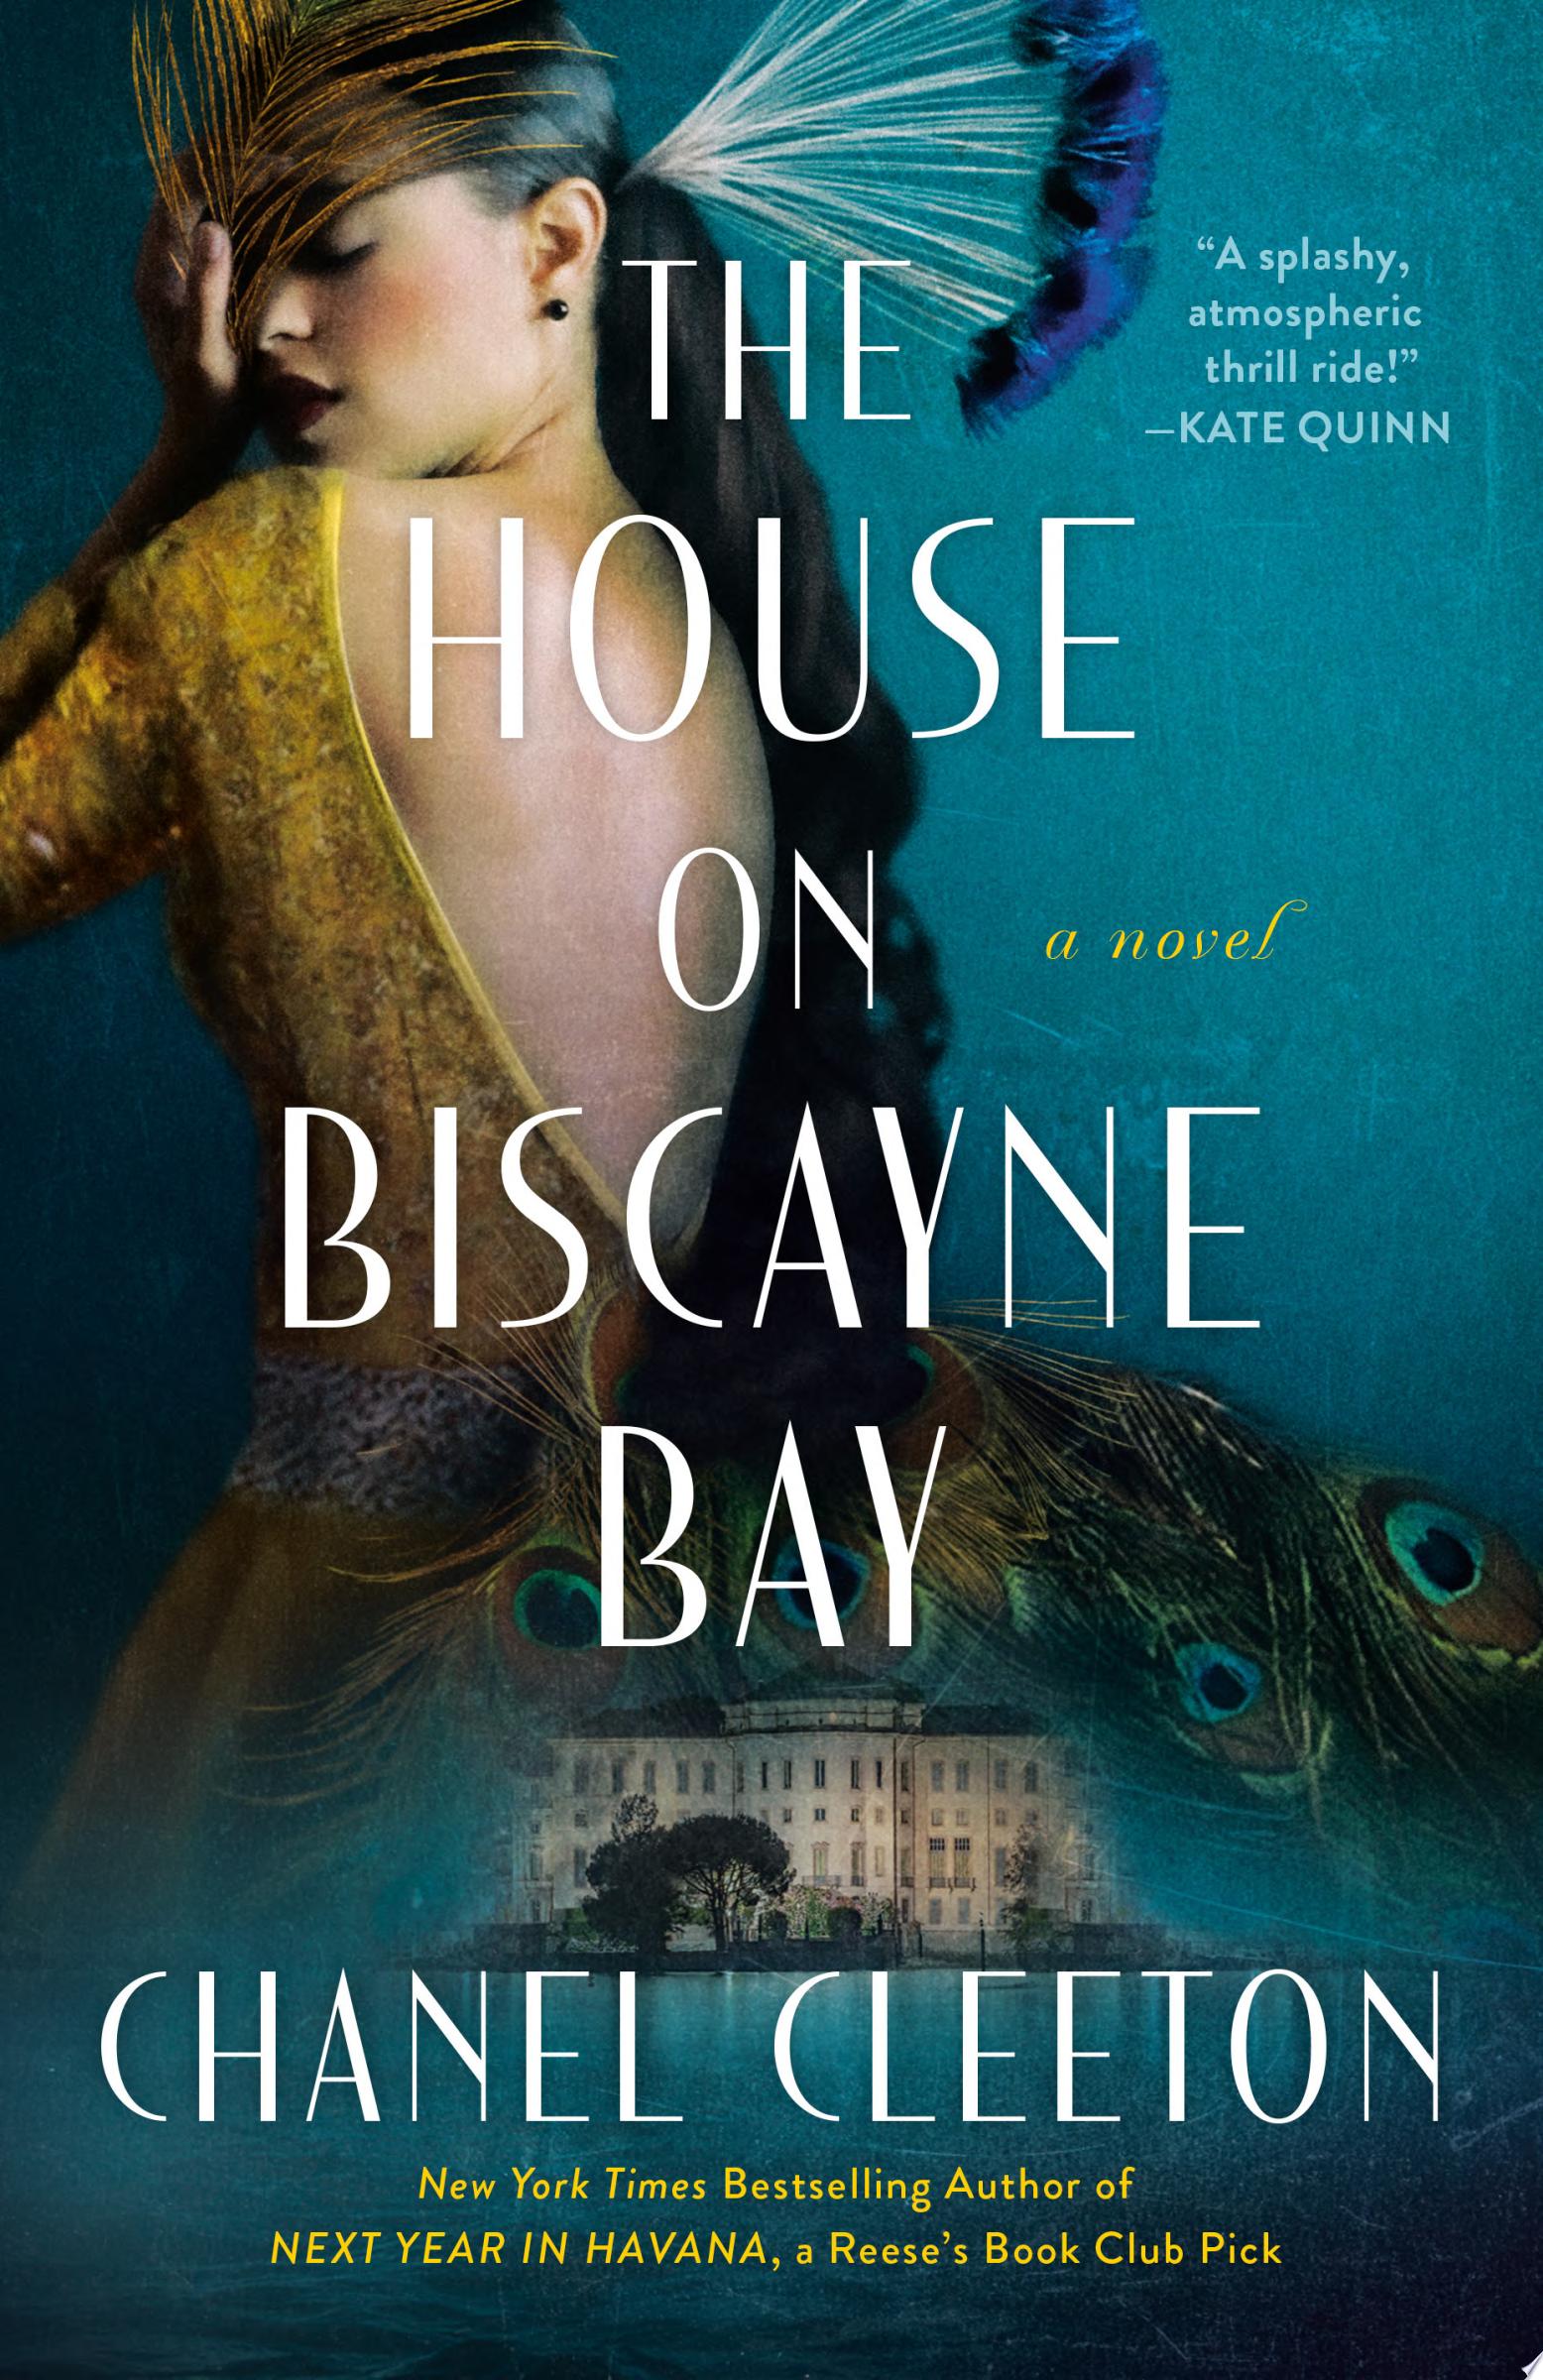 Image for "The House on Biscayne Bay"